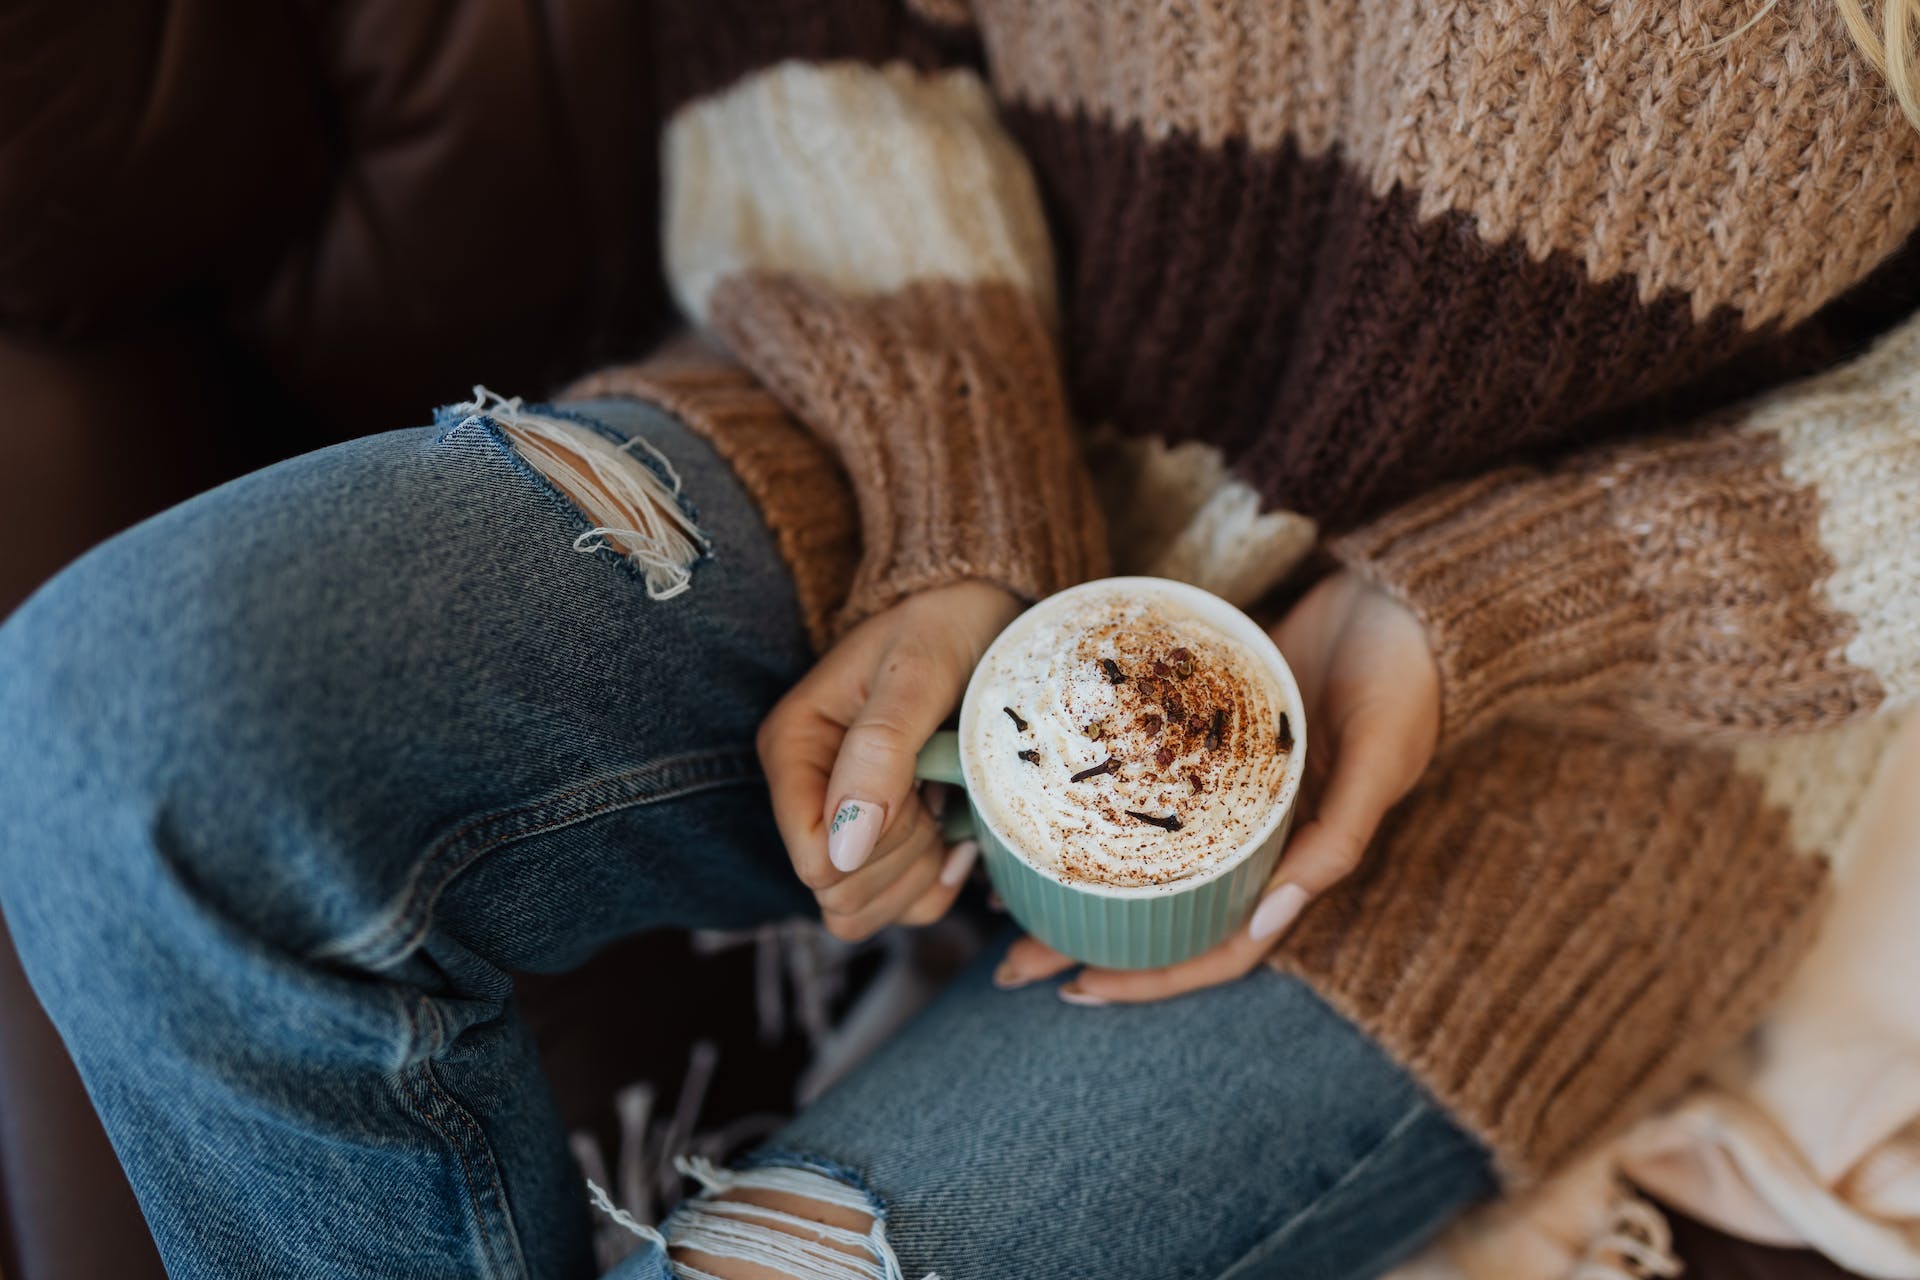 Person holding a mug of hot chocolate | Source: Pexels